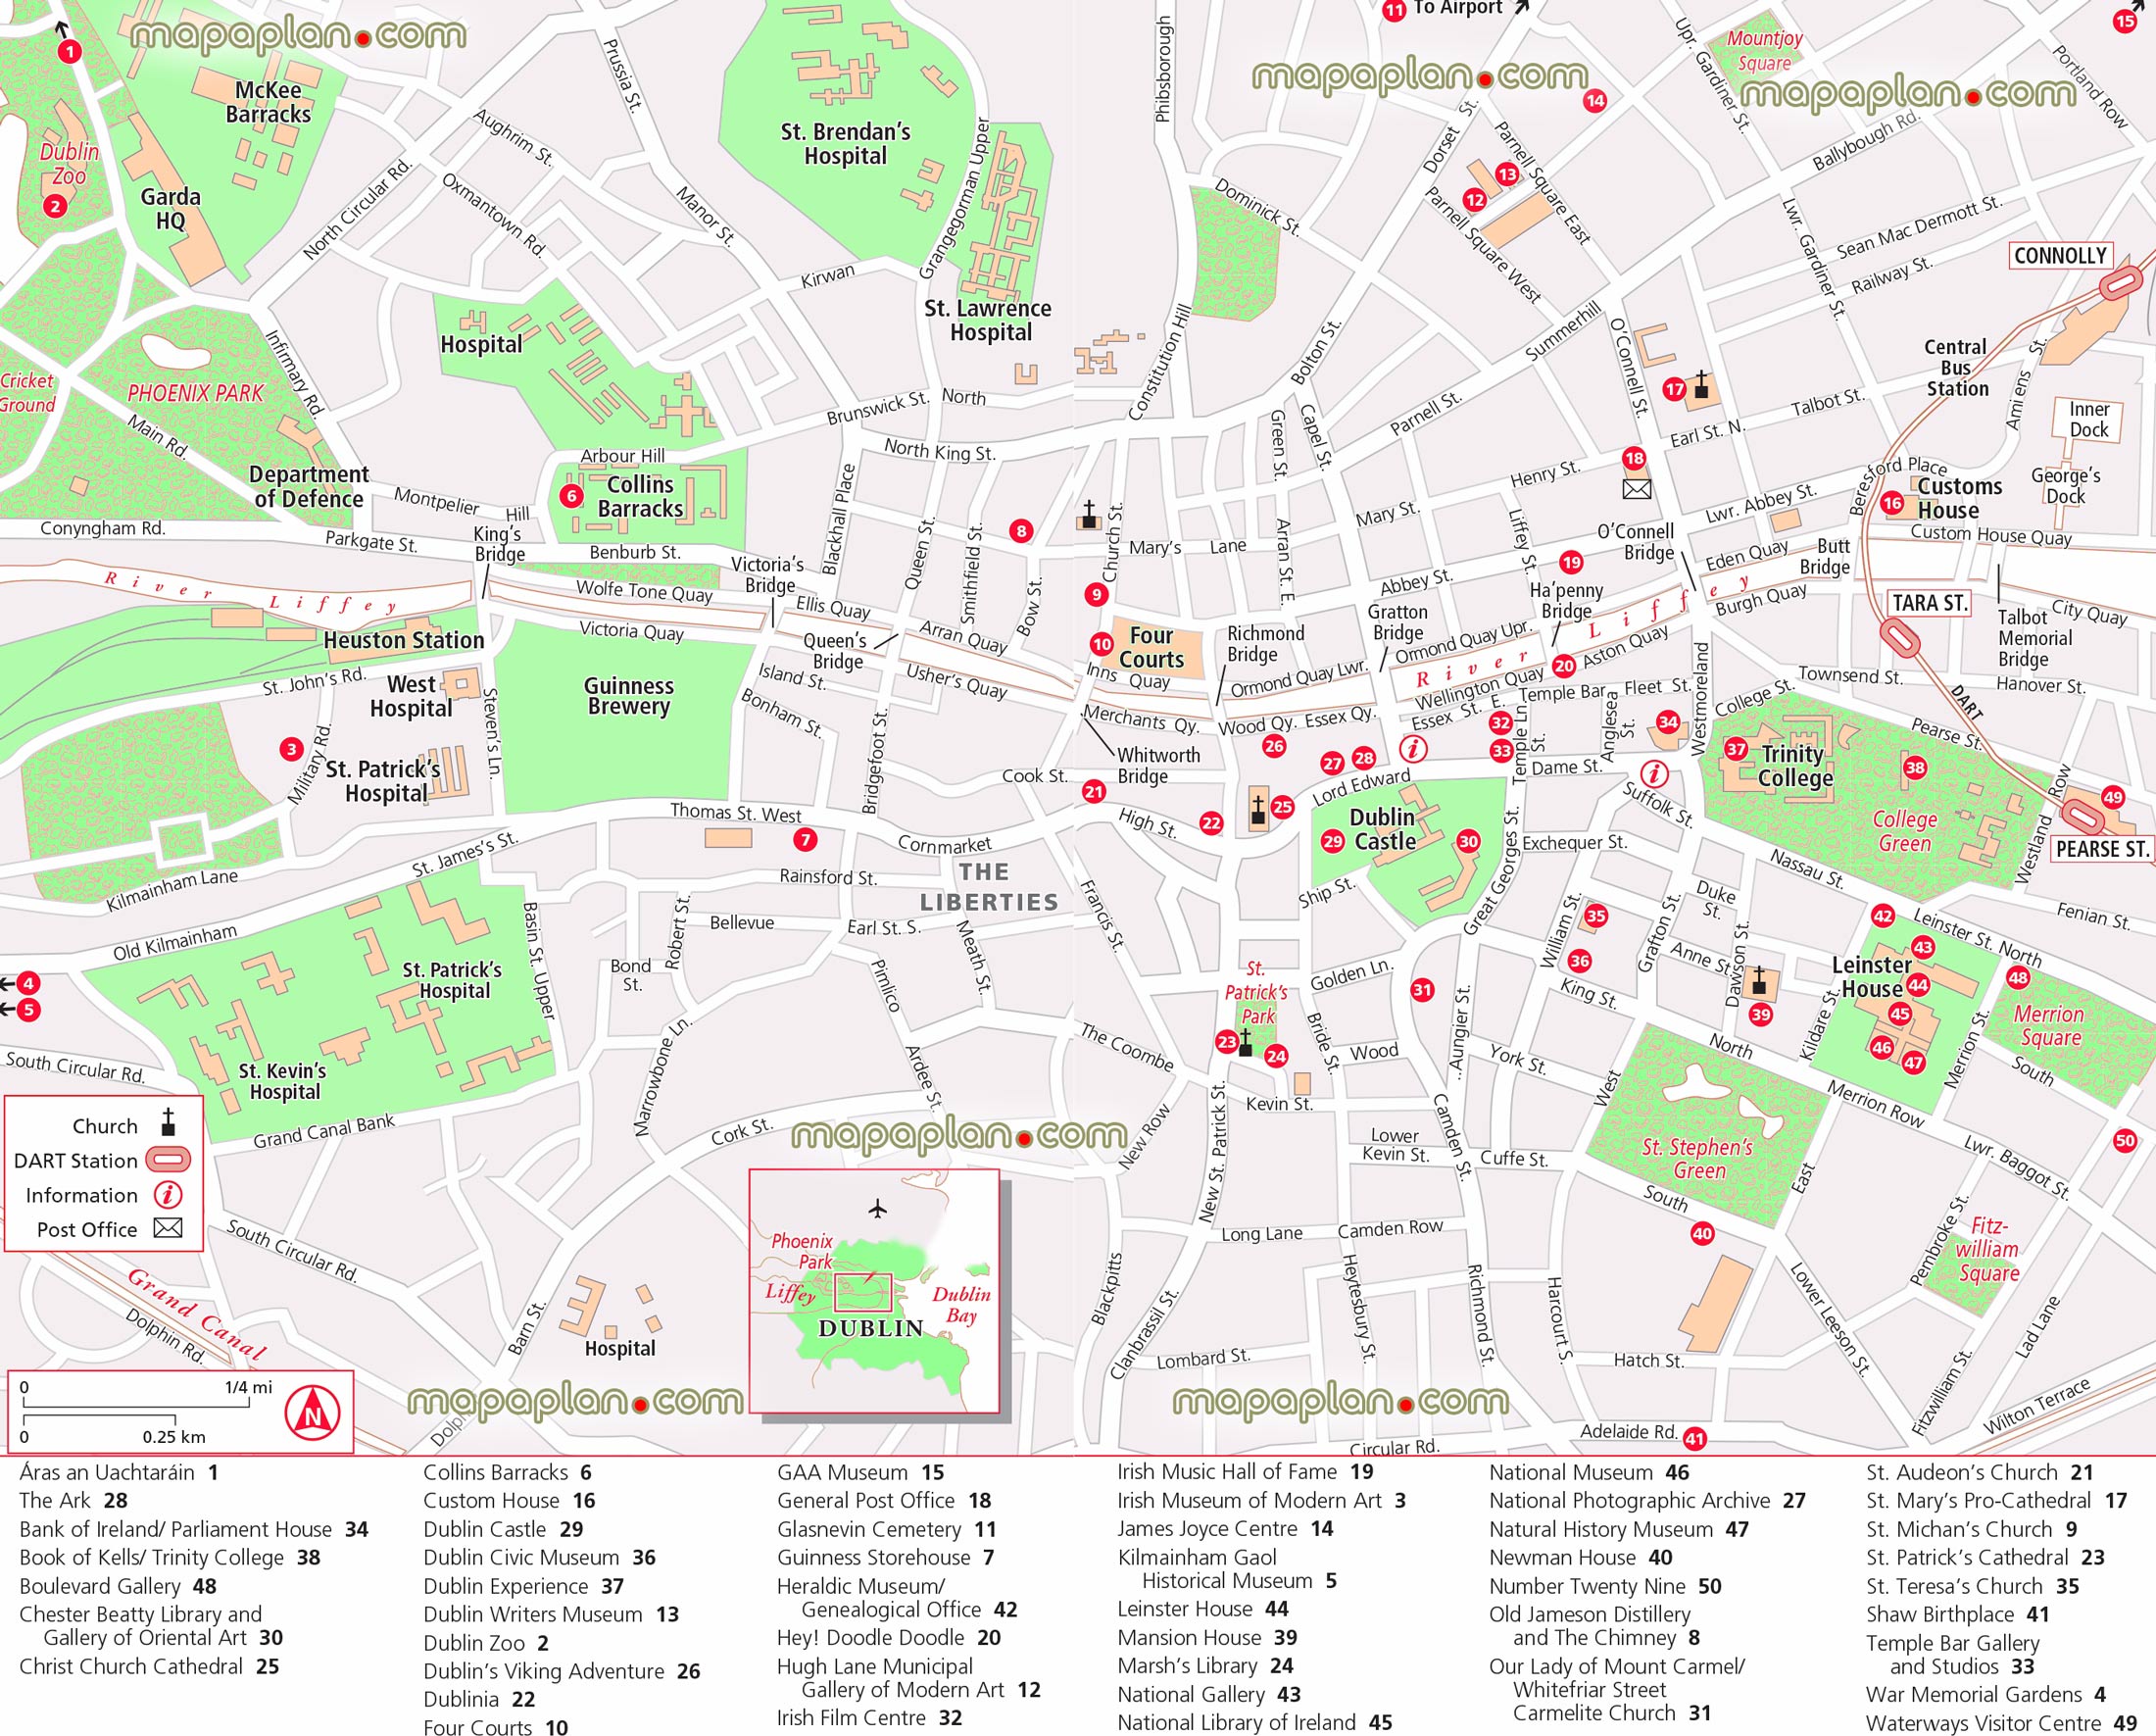 free download travel layout guide offline list attractions places visit inner city plan places interest along street names must see destinationss Dublin Top tourist attractions map